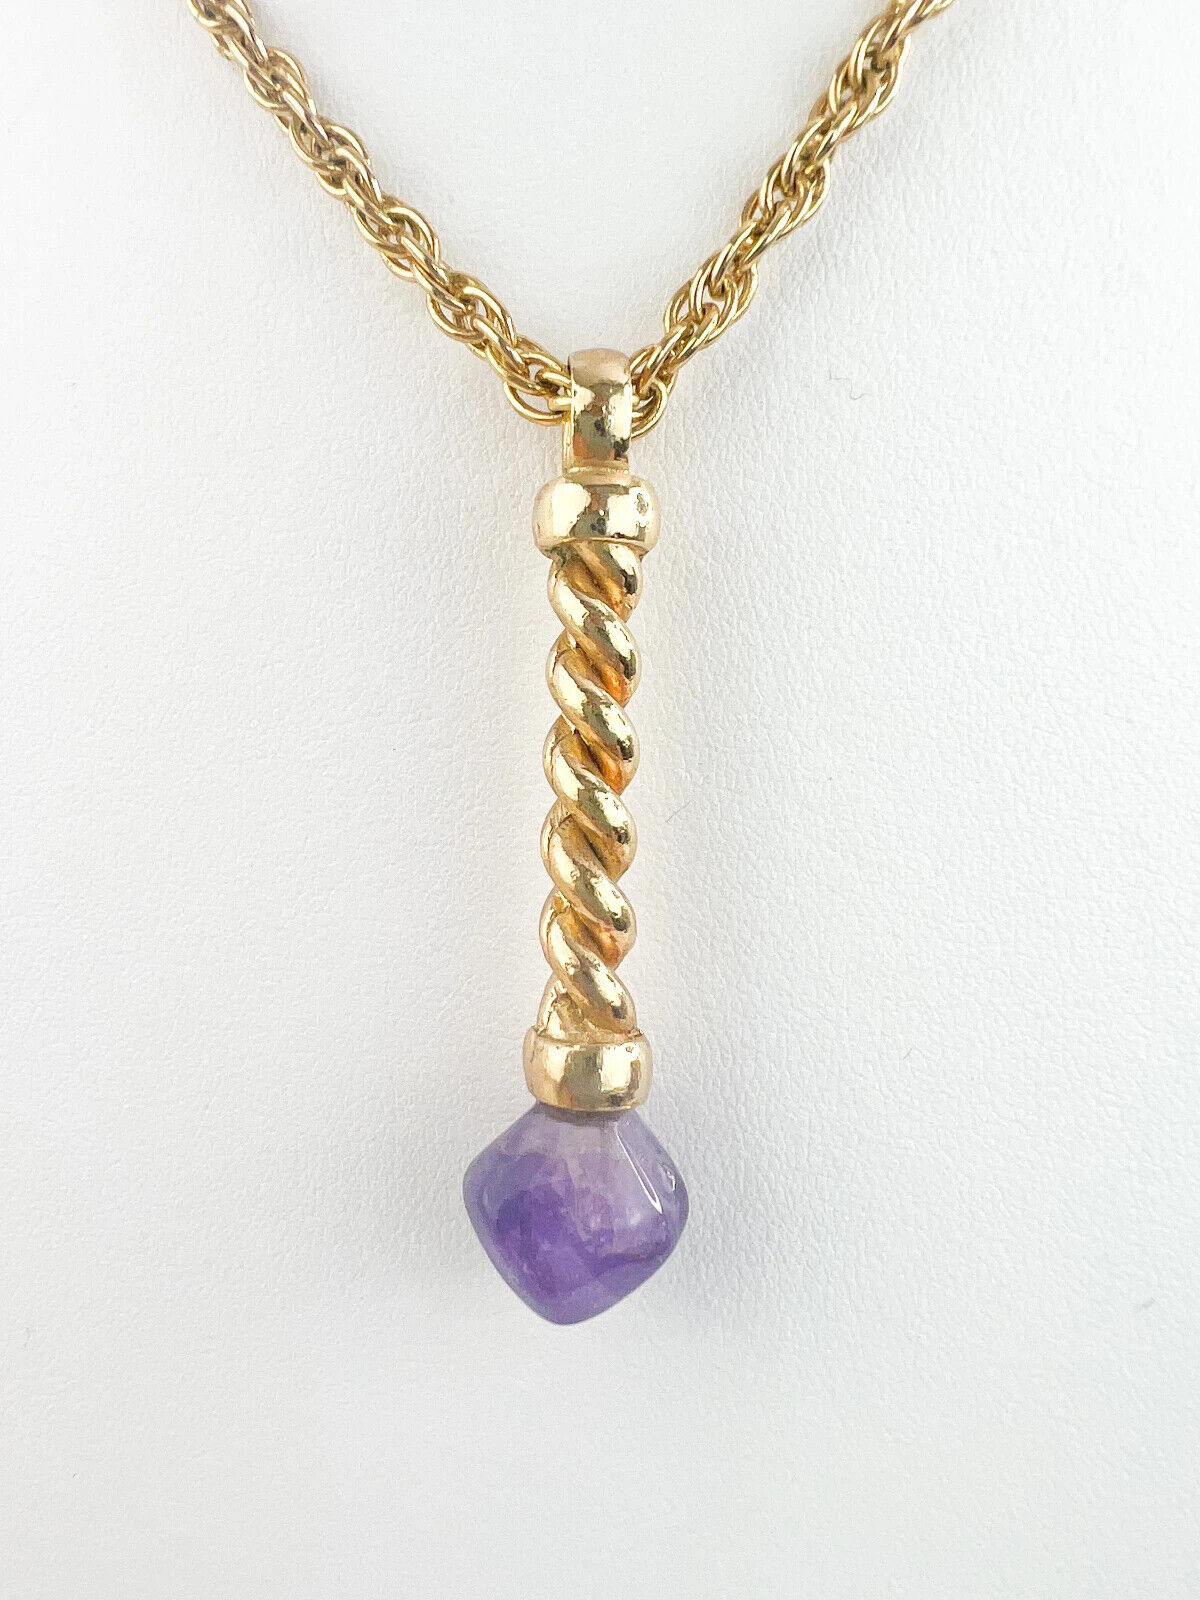 Grosse Necklace, Vintage Necklace Gold Tone Pendant Necklace, Marble Tone Purple Pendant, birthday gift, Gift for women, Jewelry for Women